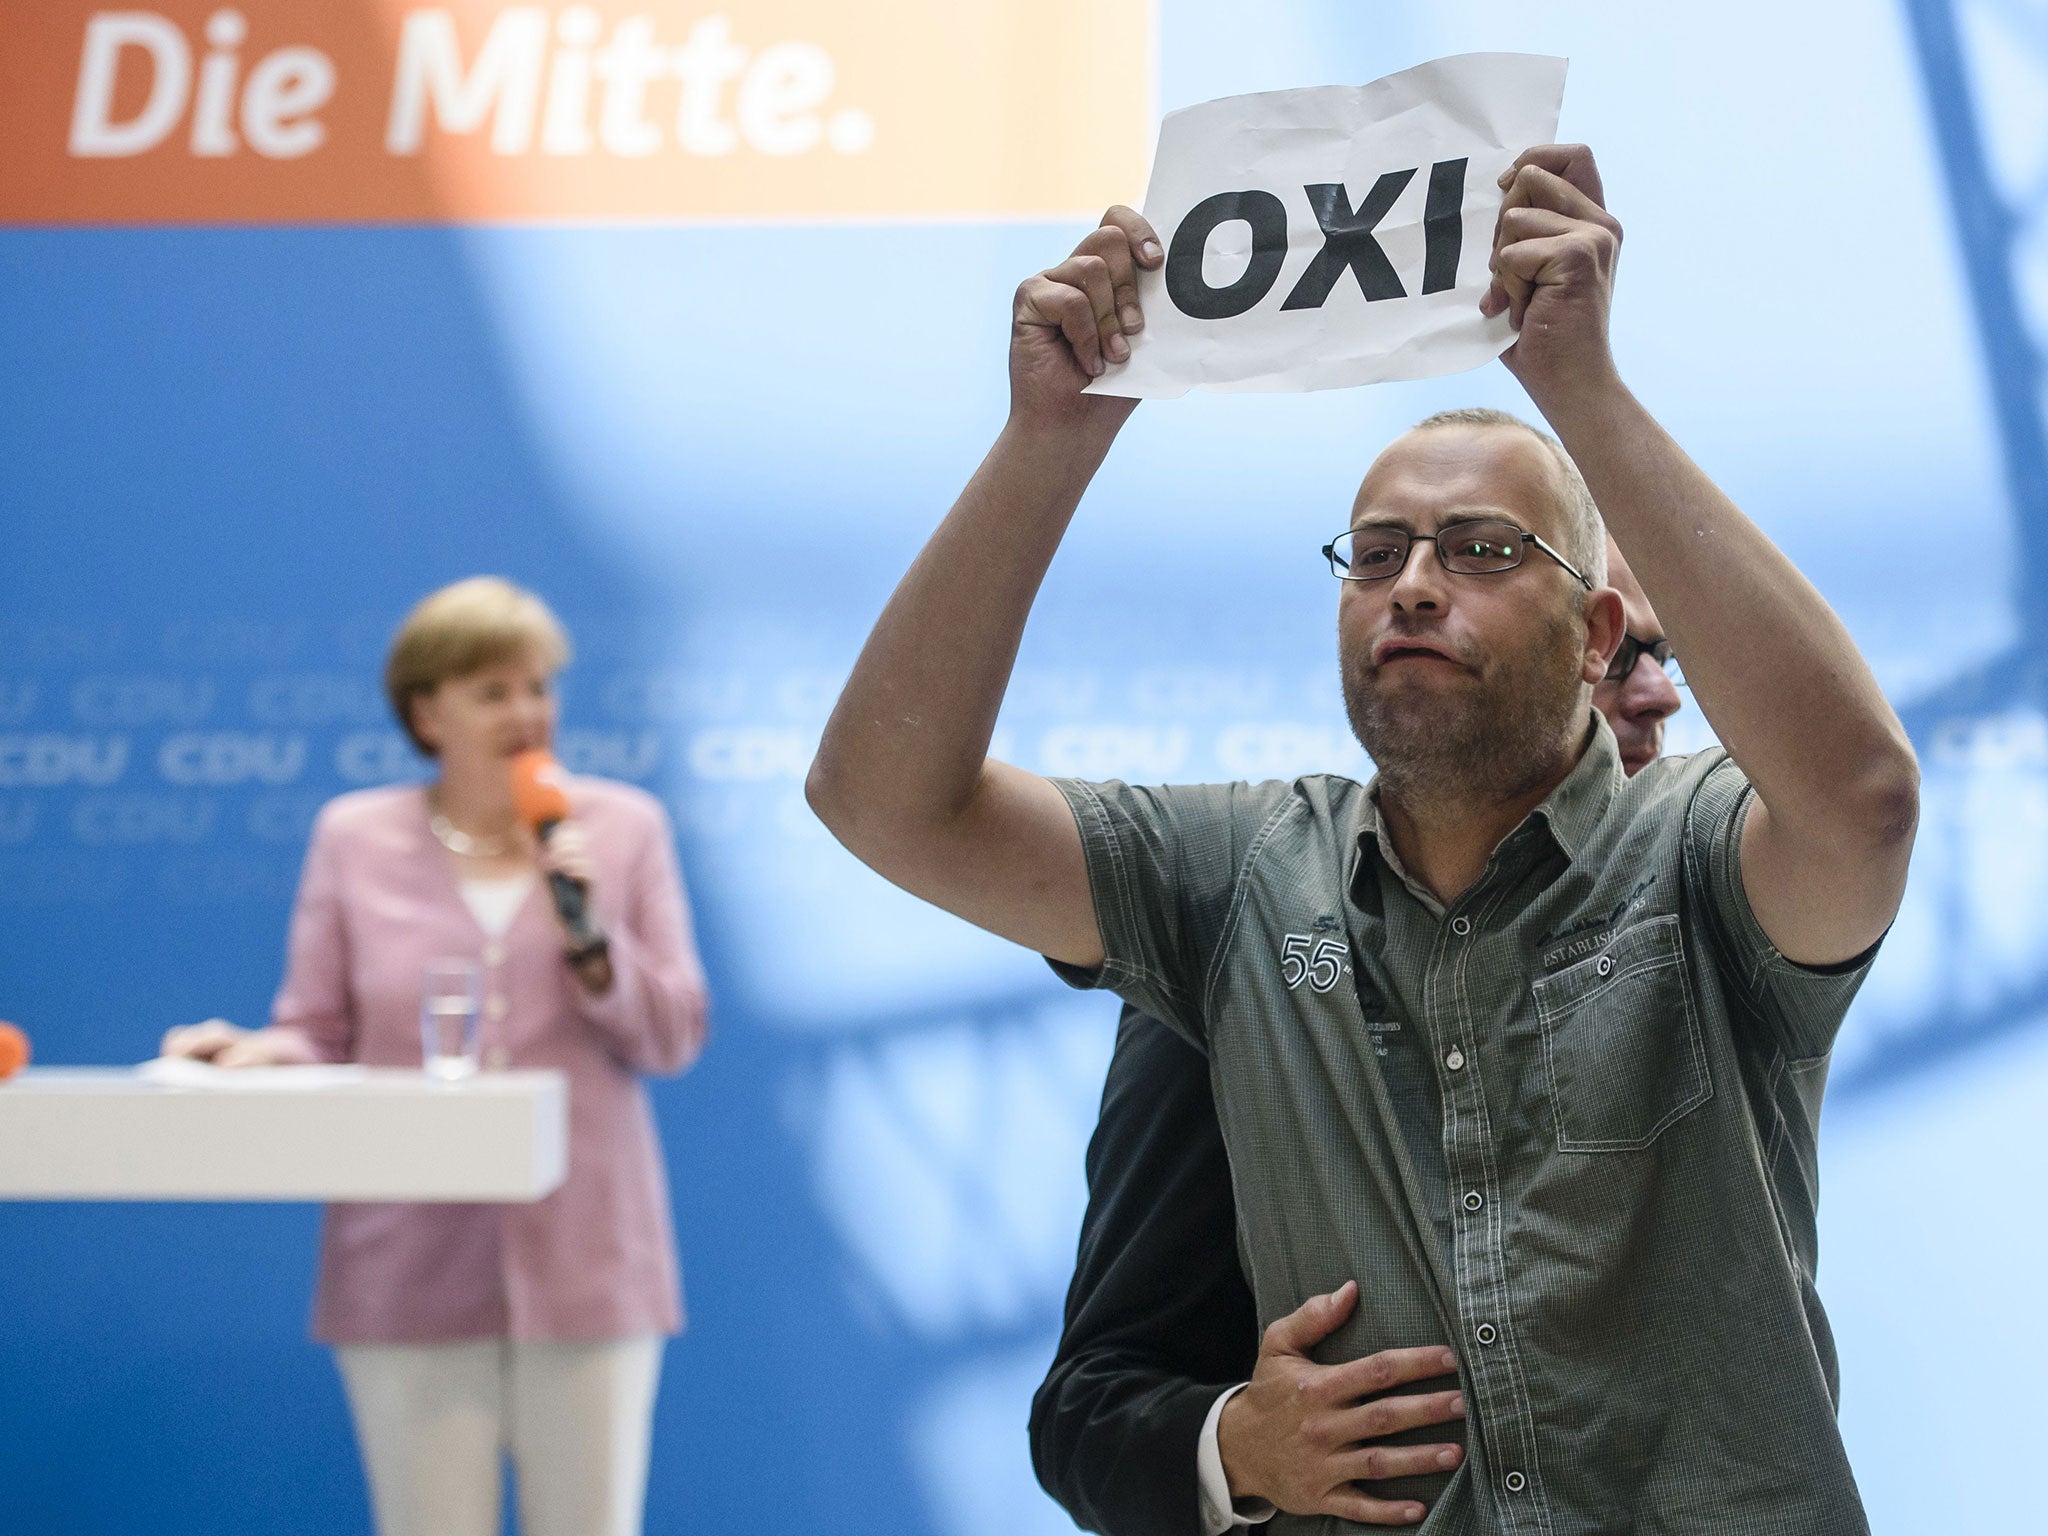 A protester holds a sheet with the Greek word for 'No' during an open house presentation of Germany's conservative Christian Democratic Union (CDU) party at Konrad Adenauer House